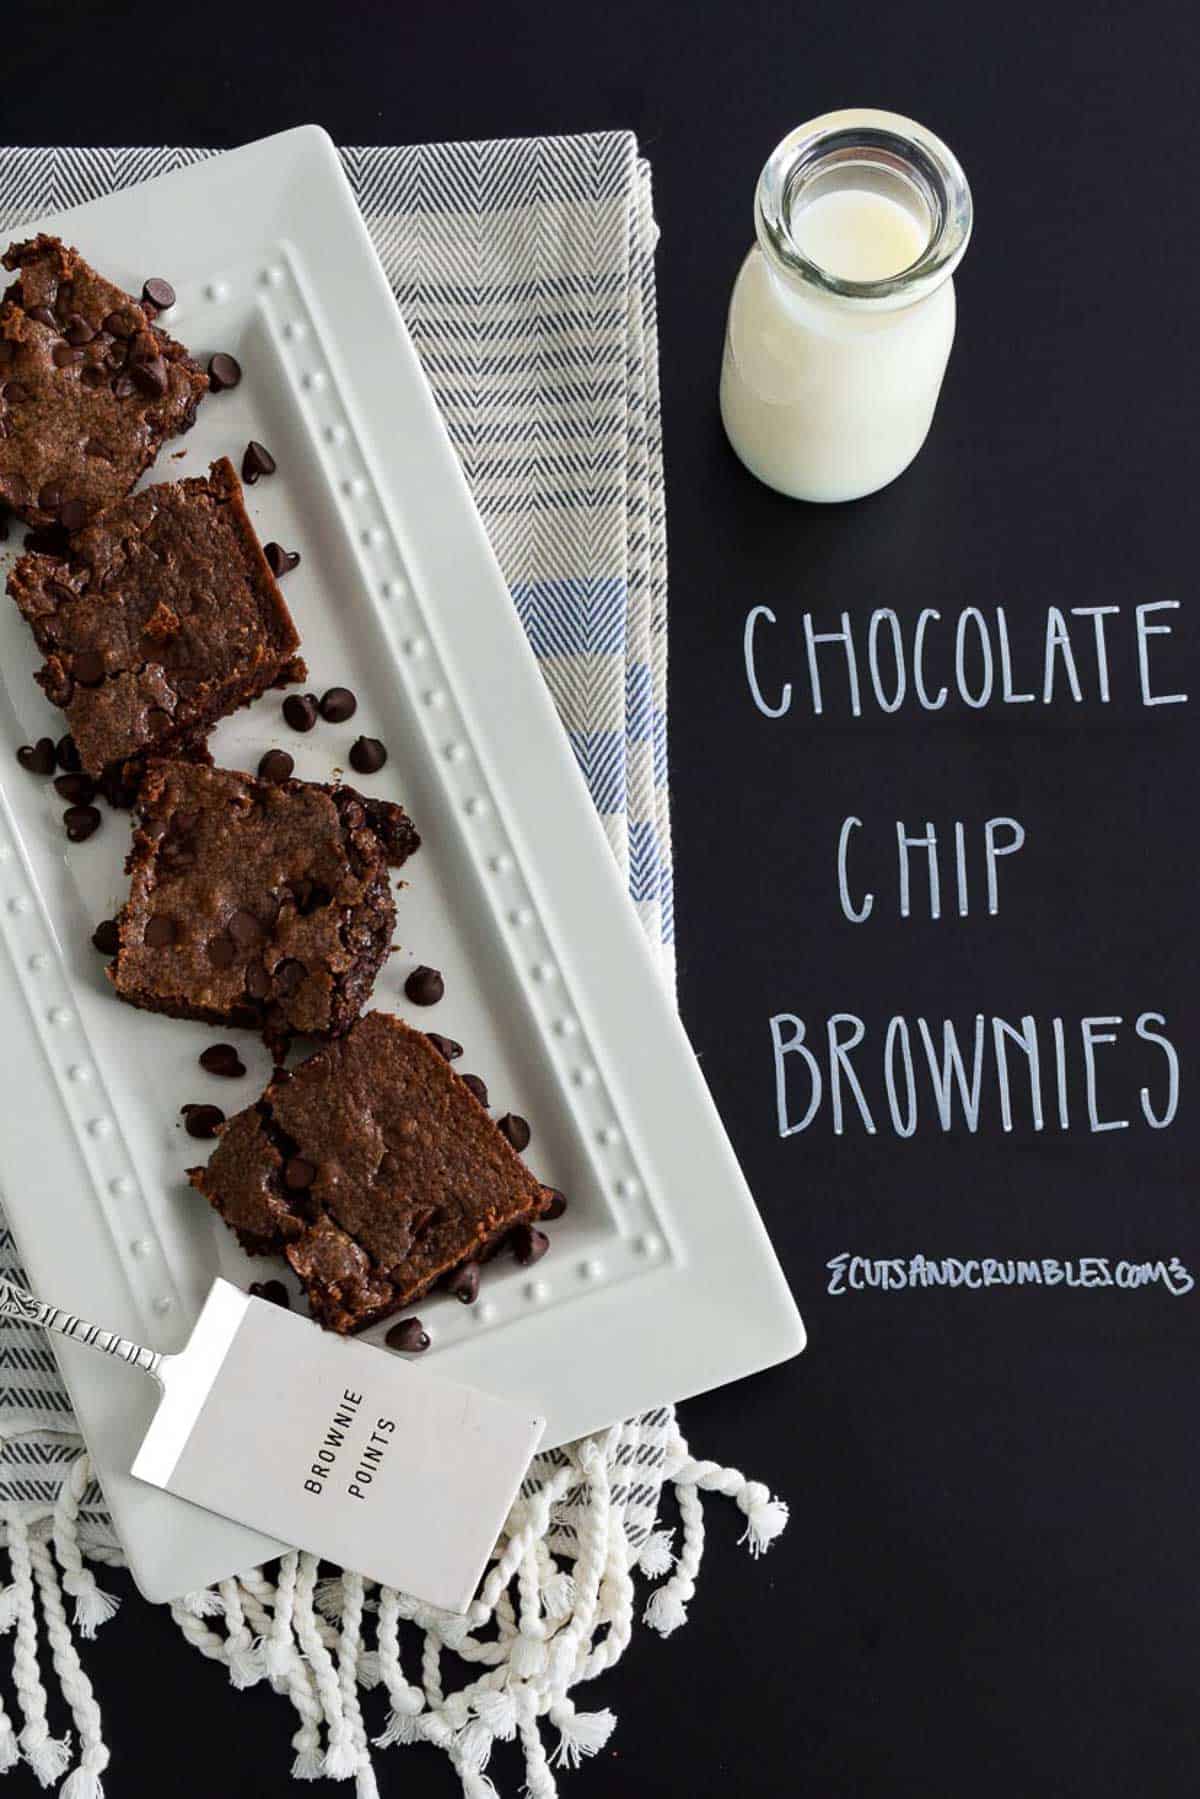 Chocolate Chip Brownies on white platter with title written on chalkboard